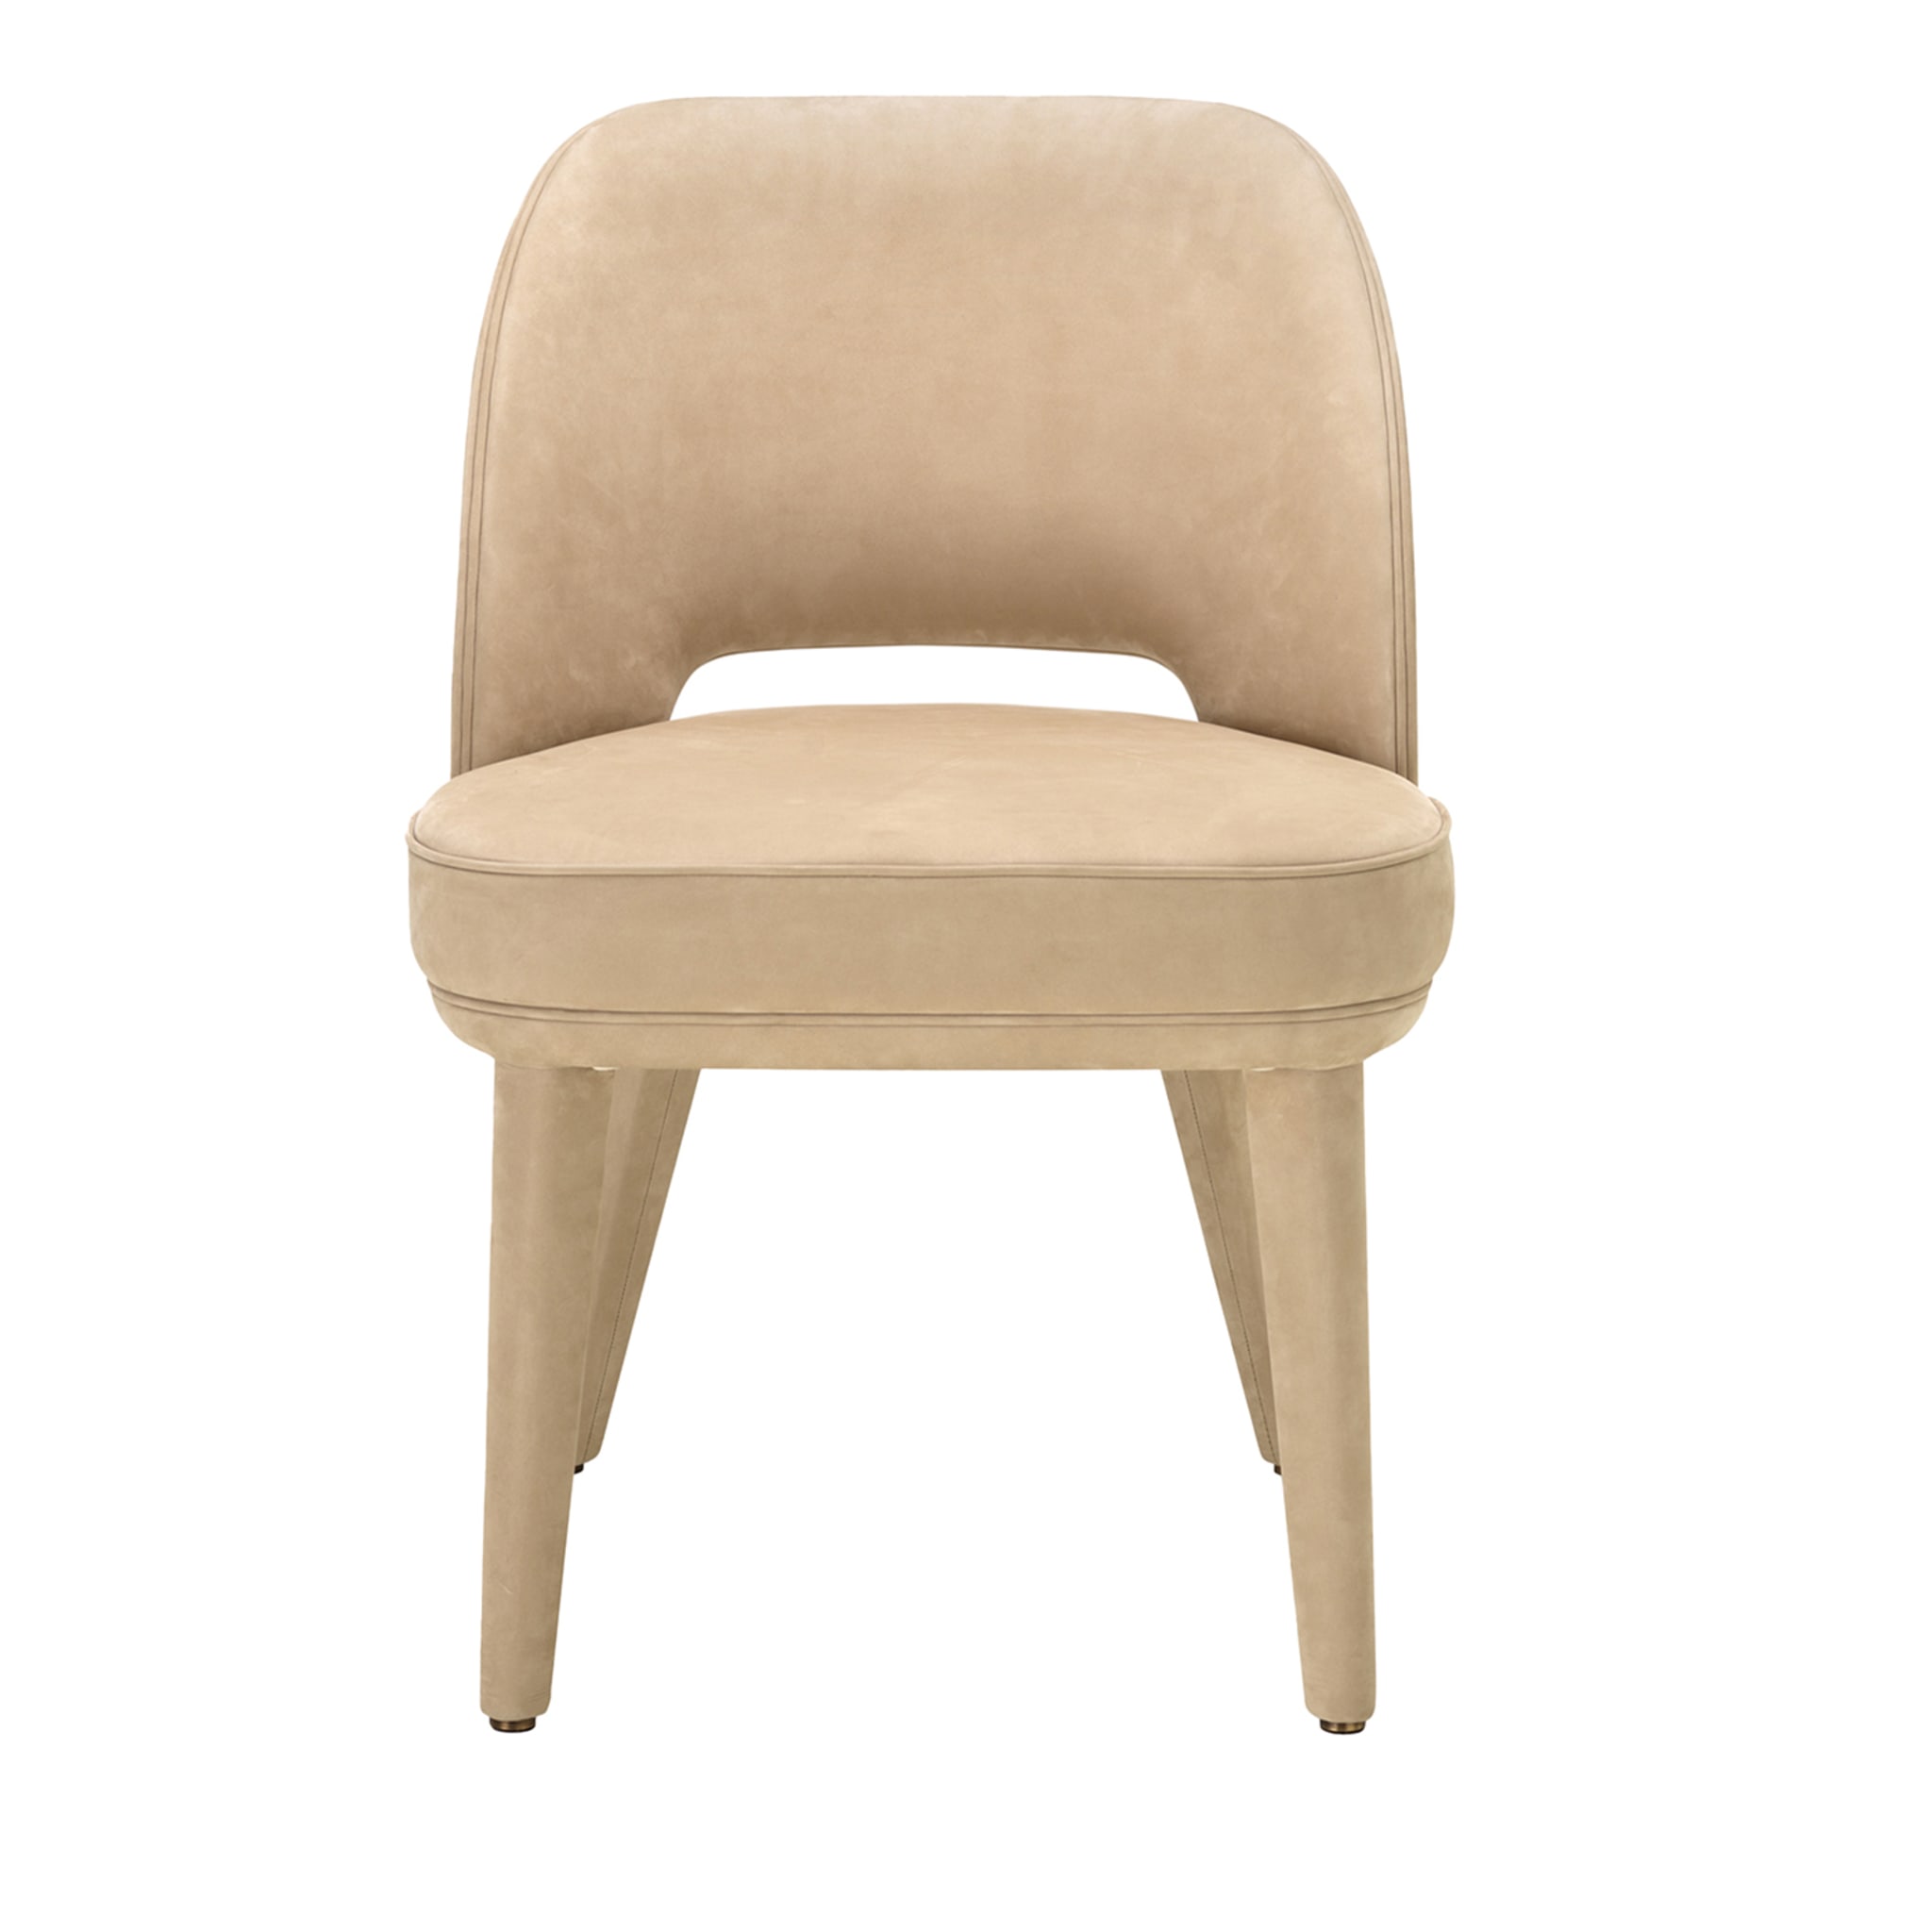 PENELOPE Sand chair - Main view